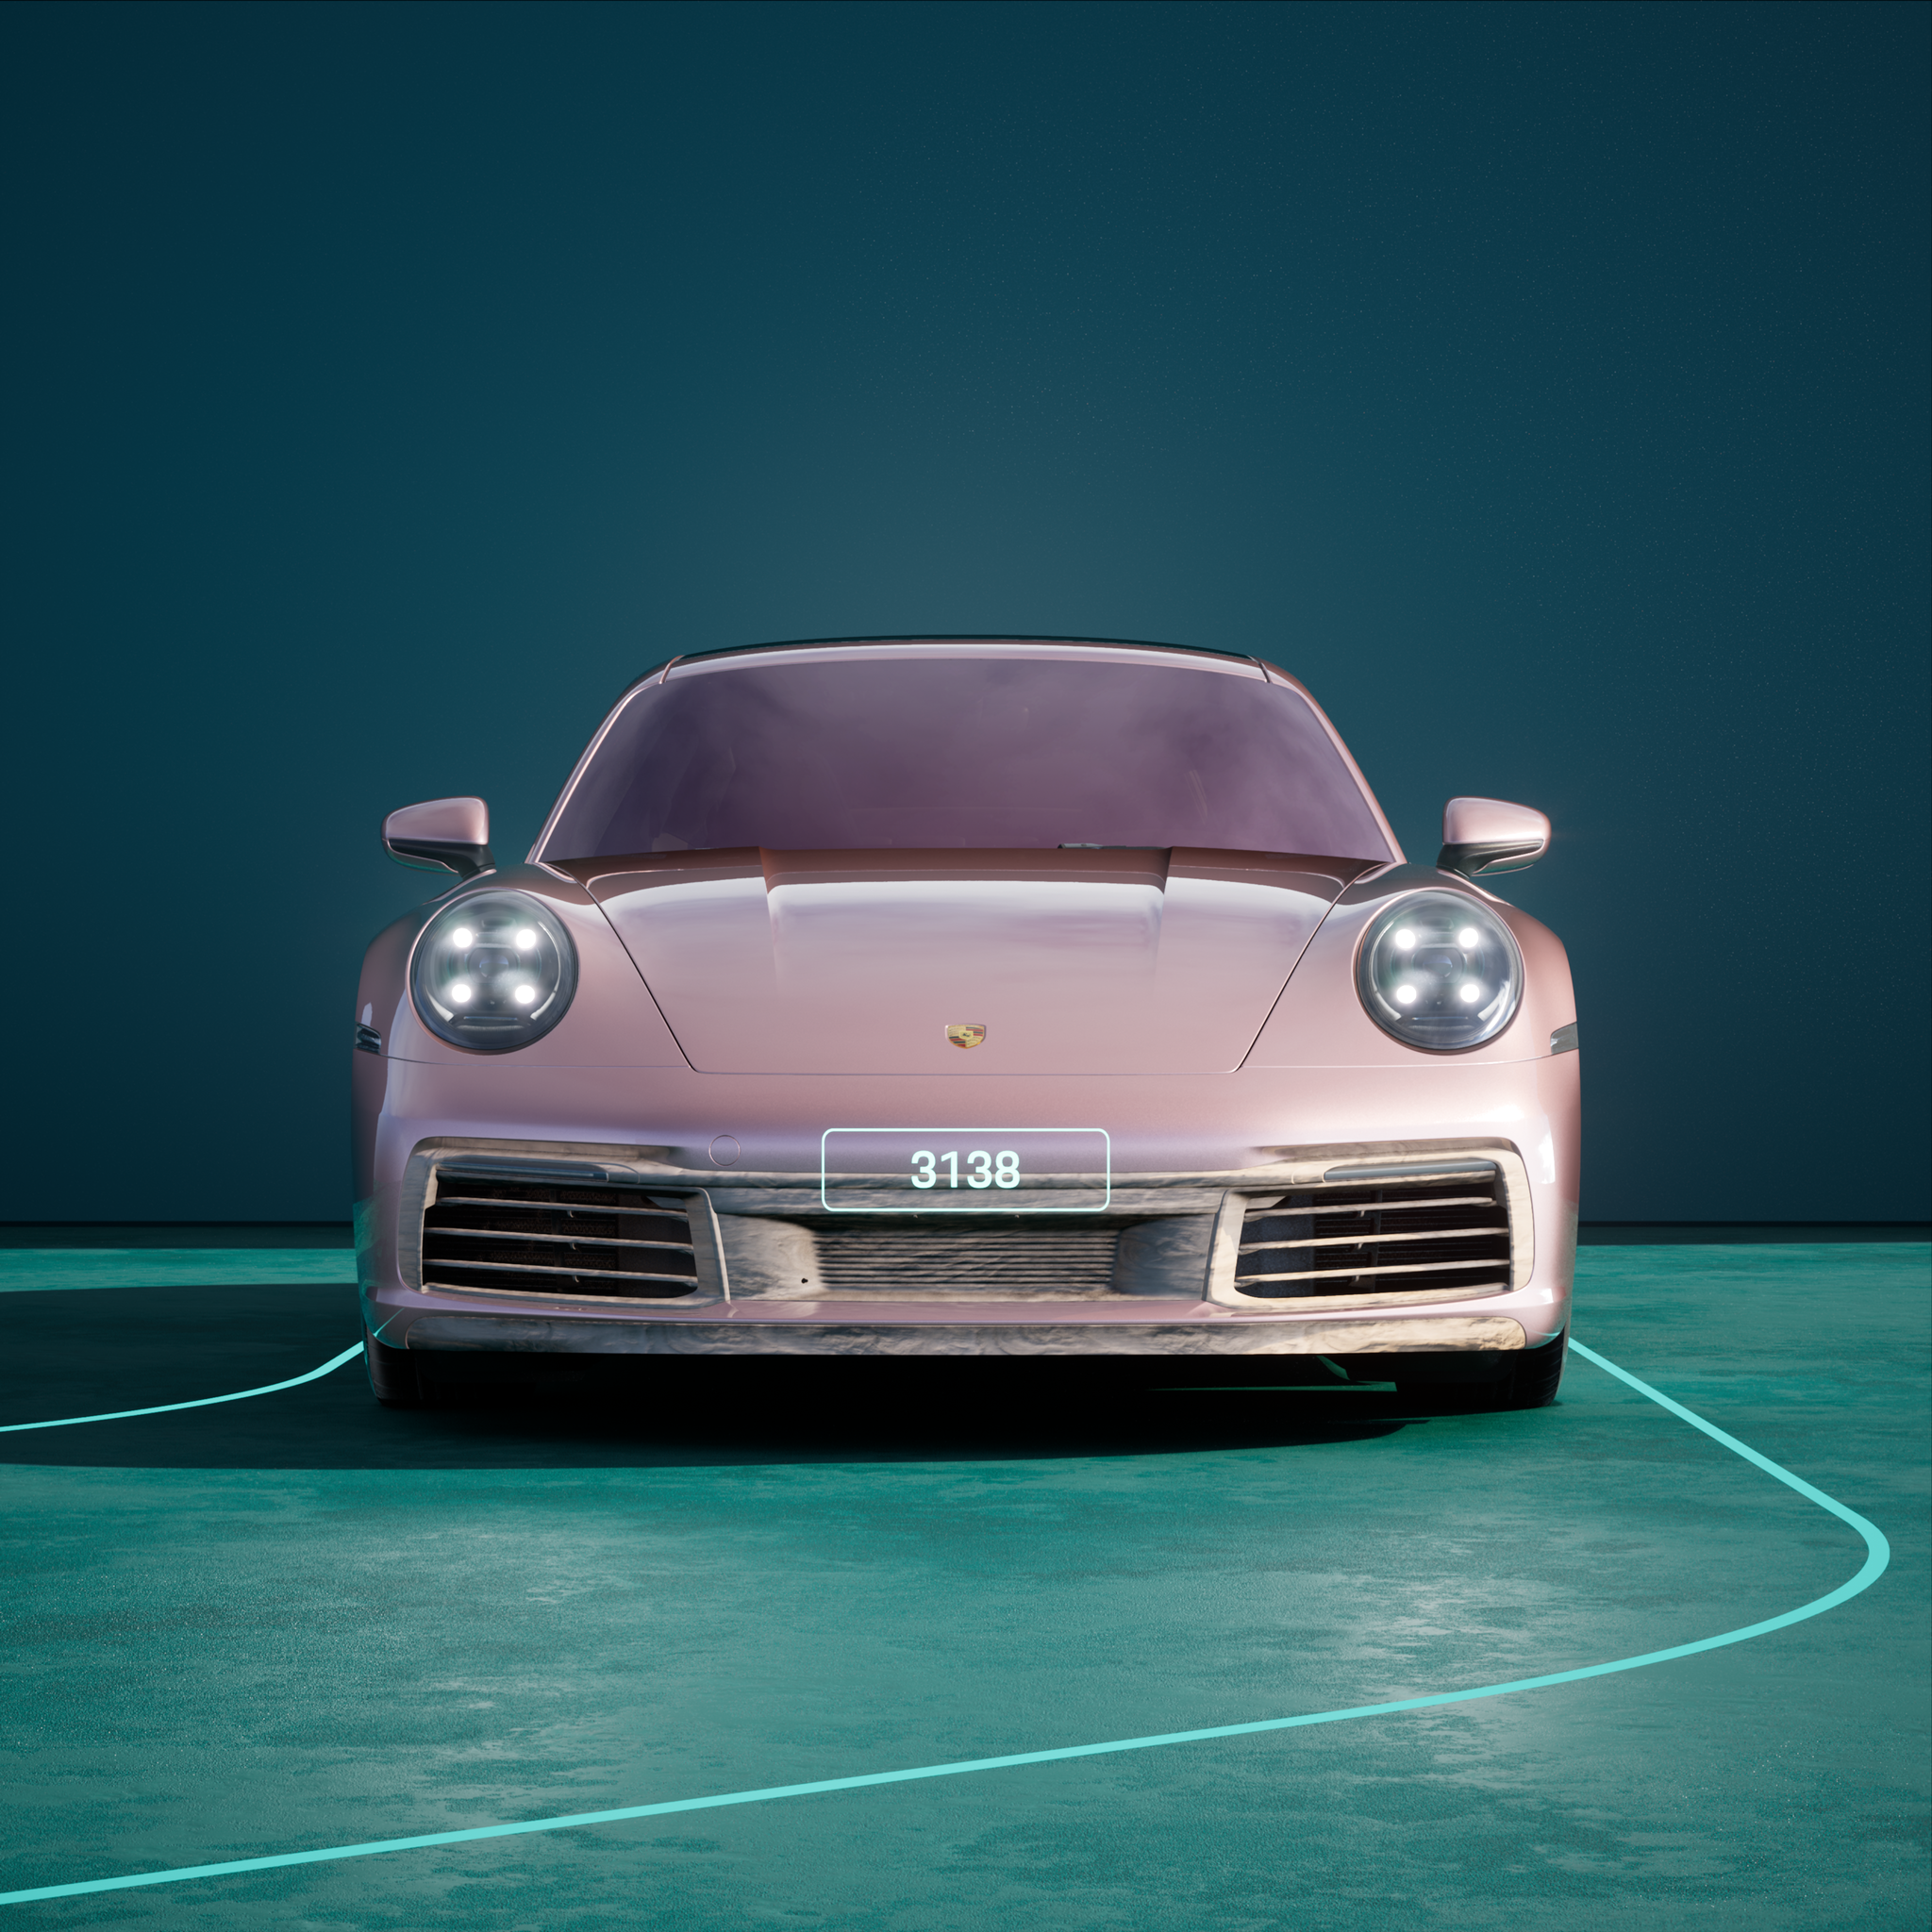 The PORSCHΞ 911 3138 image in phase